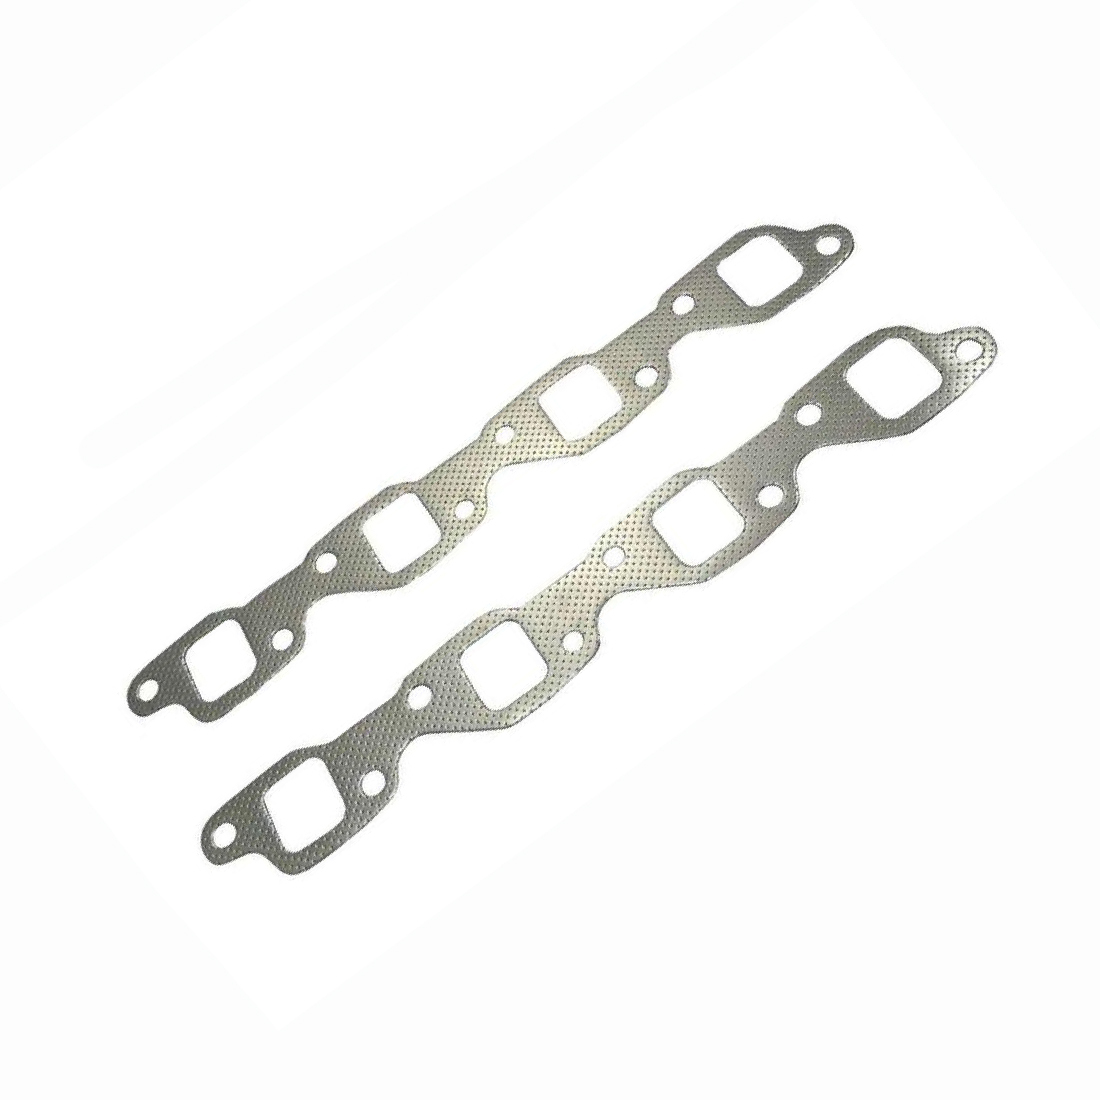 Holden Commodore 5.0L V8 EFI Exhaust Manifold Gaskets image